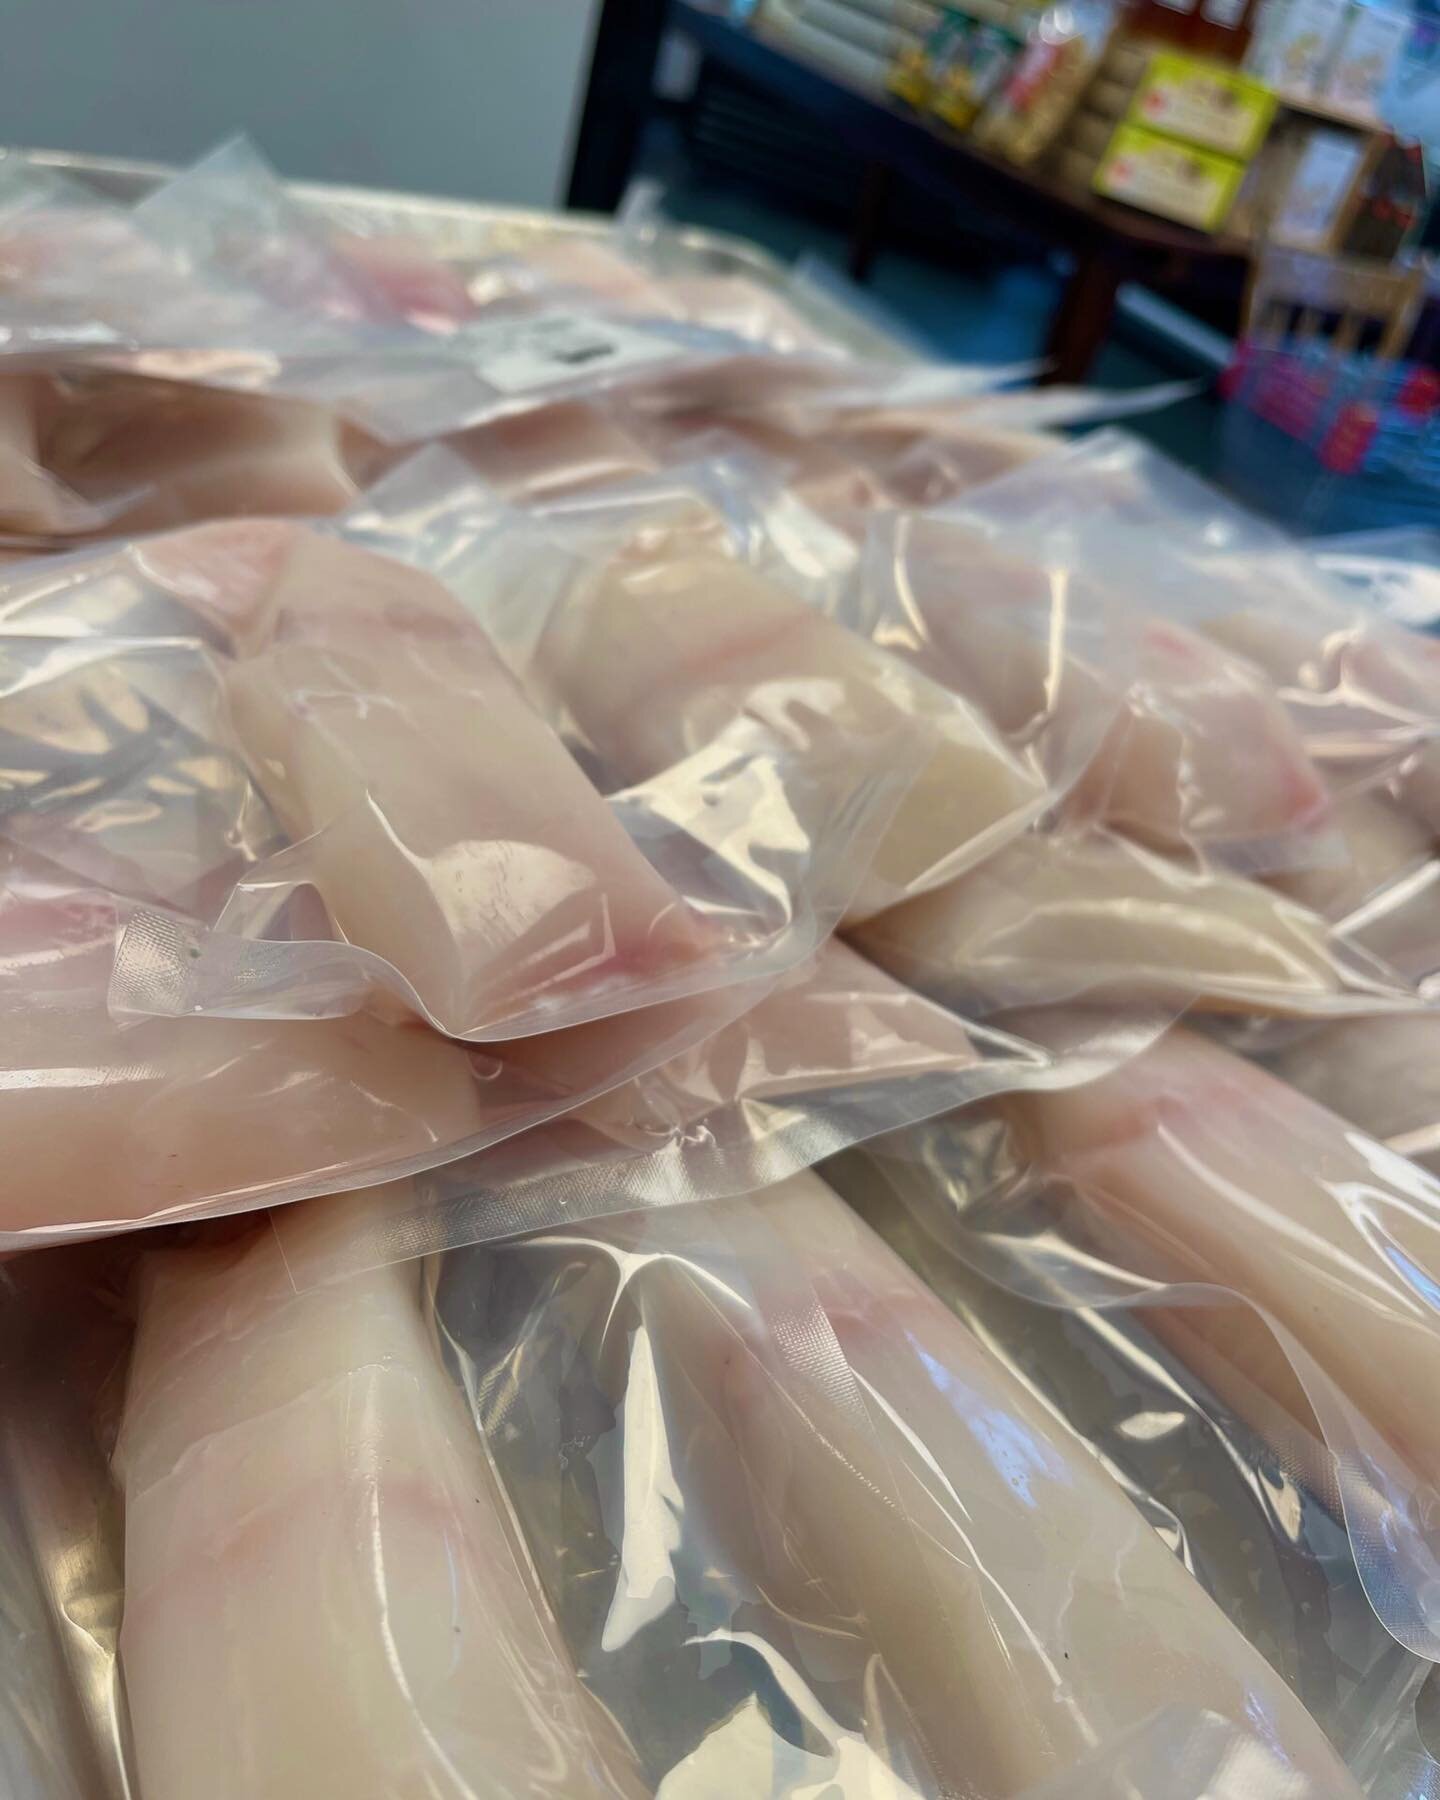 Did you know? We sell fish! Just for the 'halibut' 🤪🐟 

Halibut season has begun! Visit our store and Saturday markets for local and delicious fish 🎣

🐟 NS Wild Halibut
🐟 NS Inland Atlantic Salmon
🐟 Ont Rainbow Trout
🐟 Ont Smoked Trout

Find u